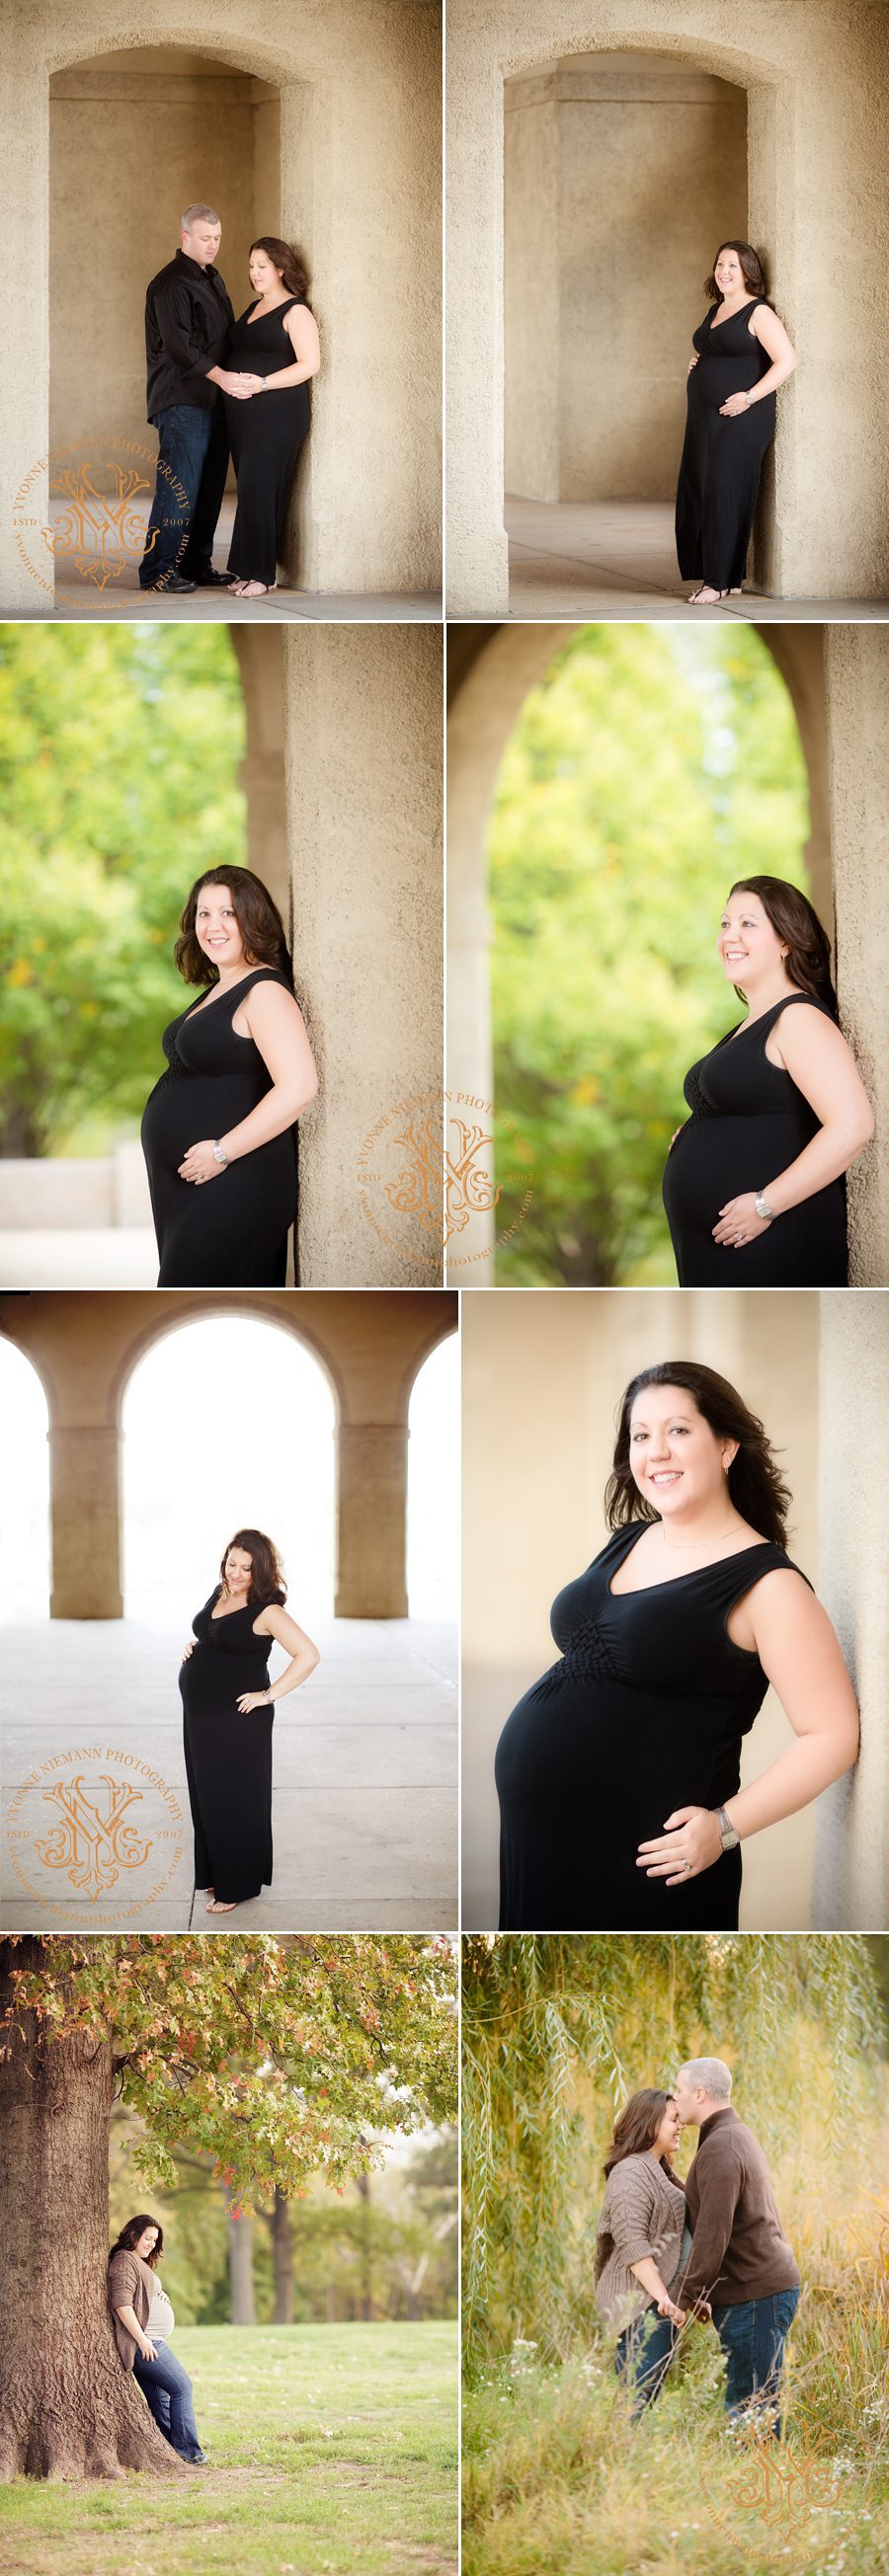 Beautiful maternity portraits in St. Louis taken by Yvonne Niemann Photography in Forest Park.